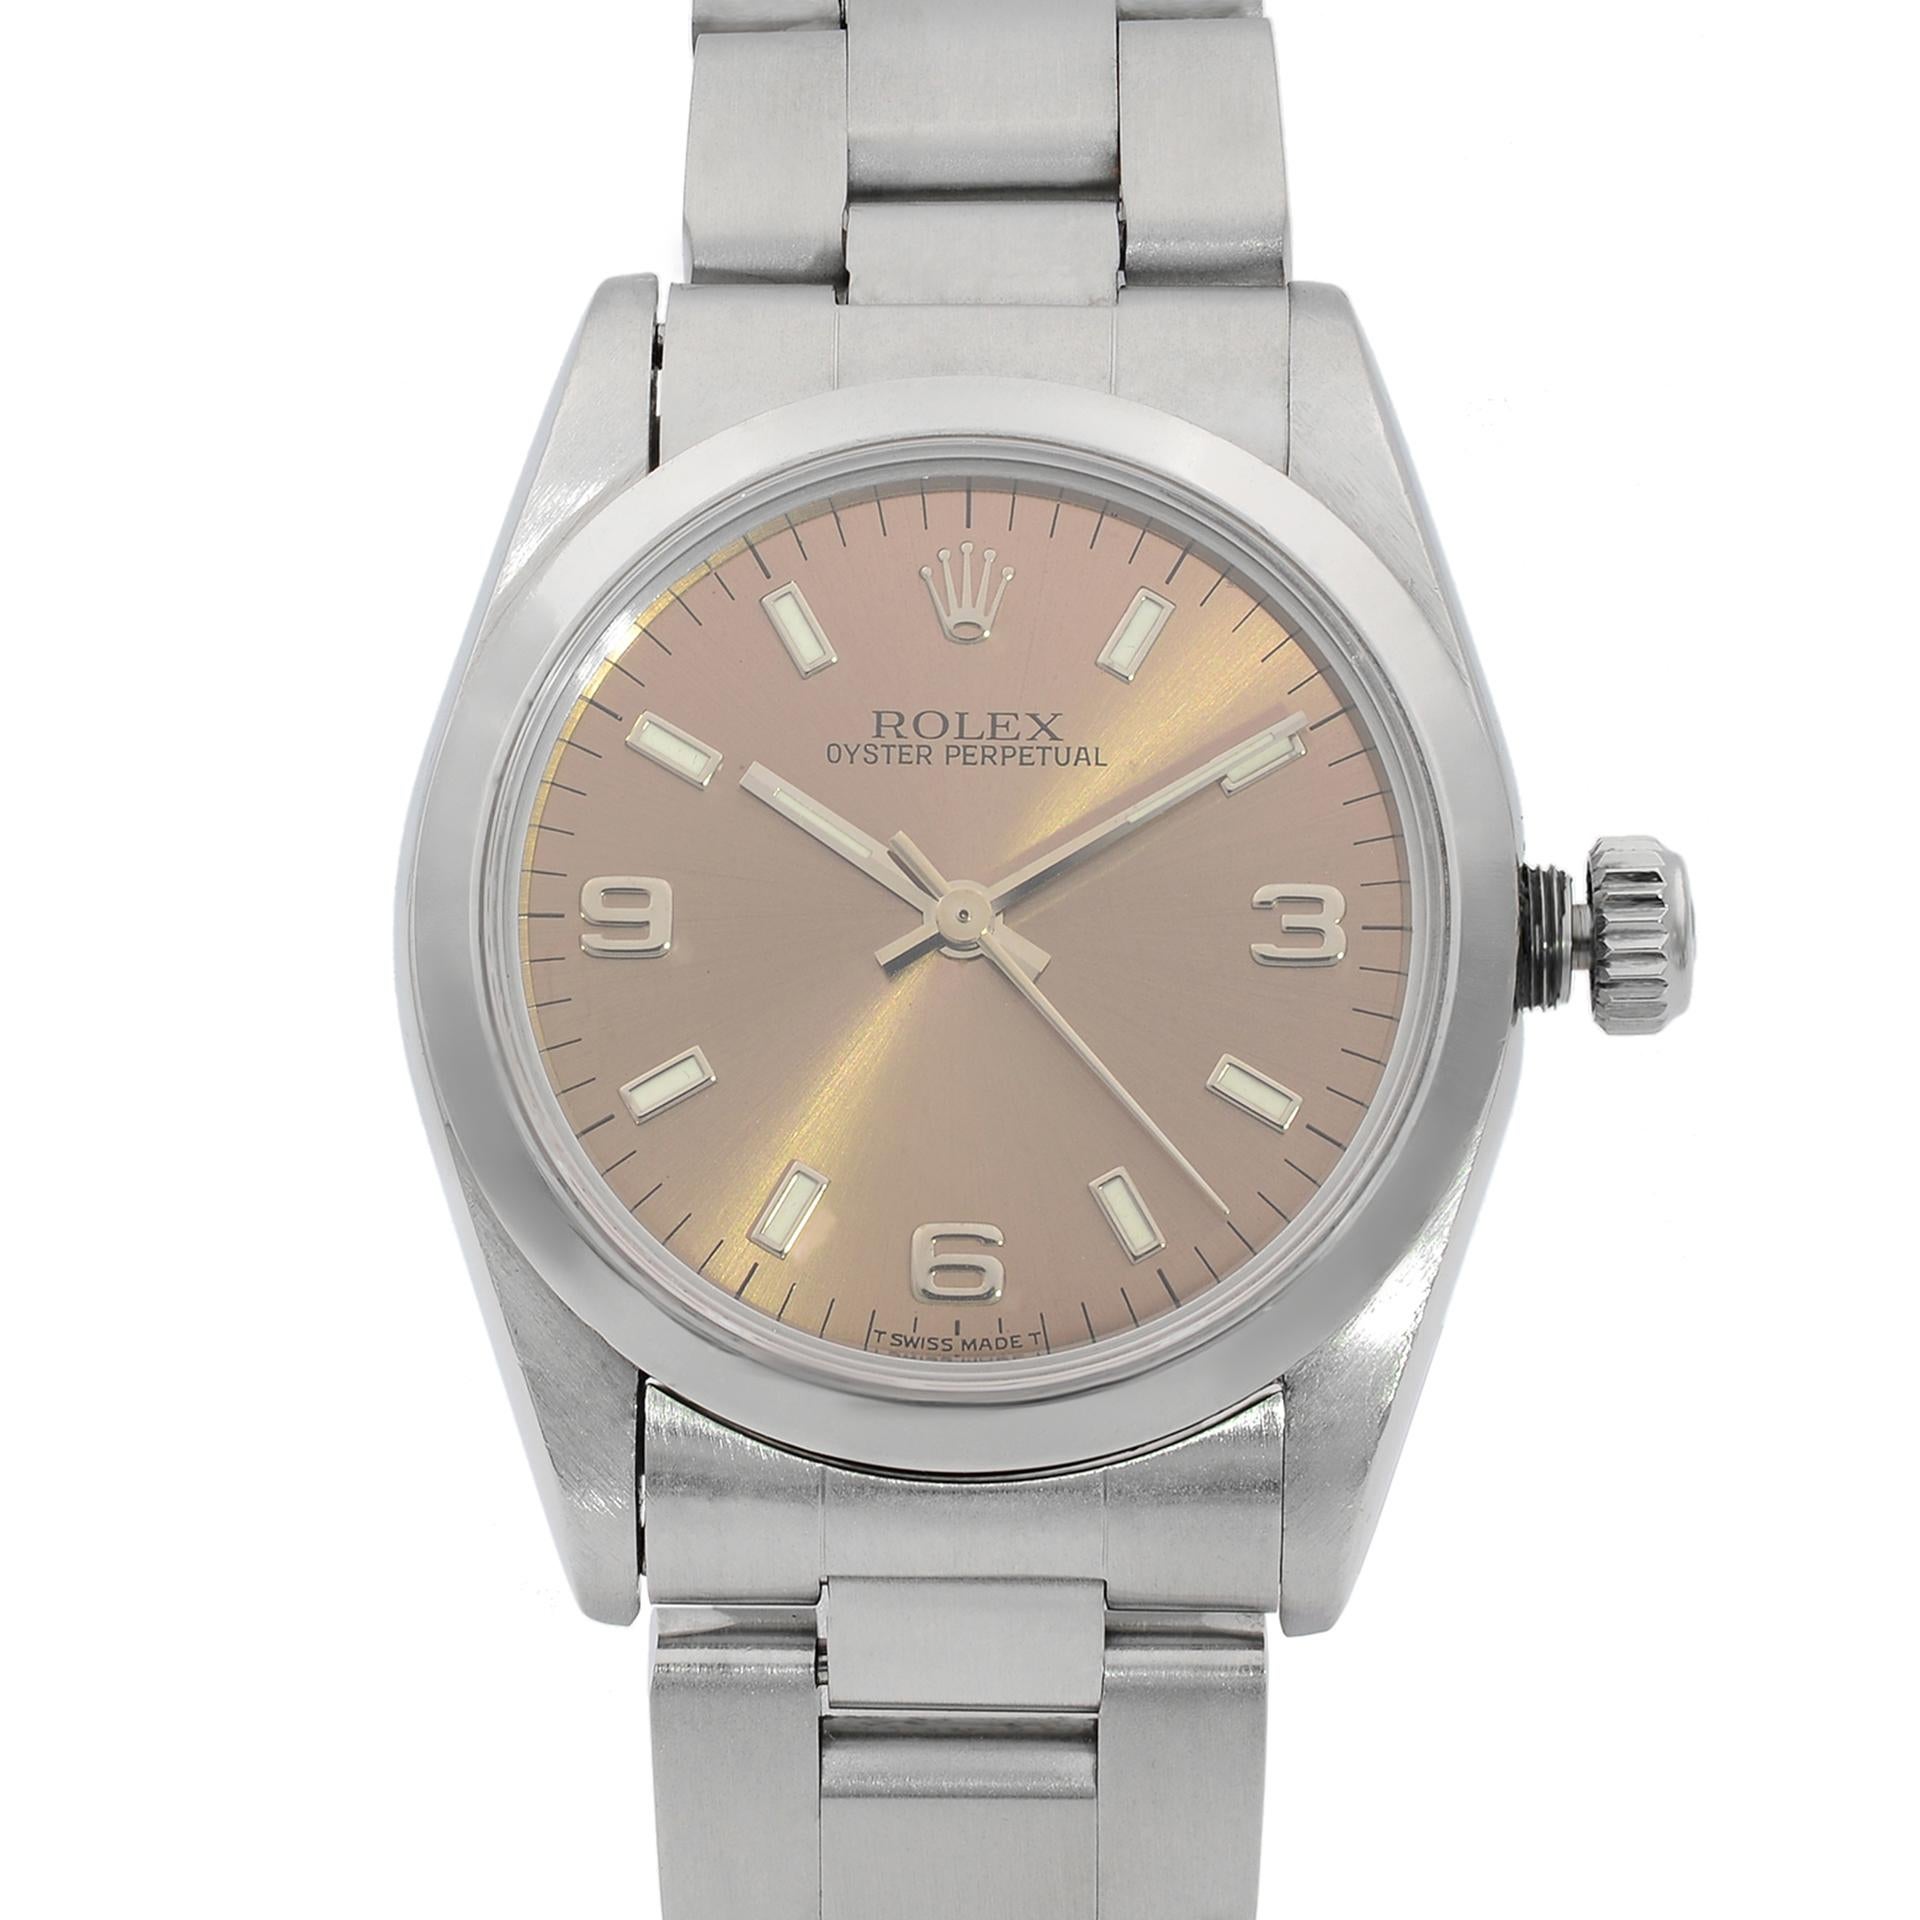 This pre-owned Rolex Oyster Perpetual 67480 is a beautiful Ladie's timepiece that is powered by a mechanical (automatic) movement which is cased in a stainless steel case. It has a round shape face, no features dial, and has hand sticks & numerals